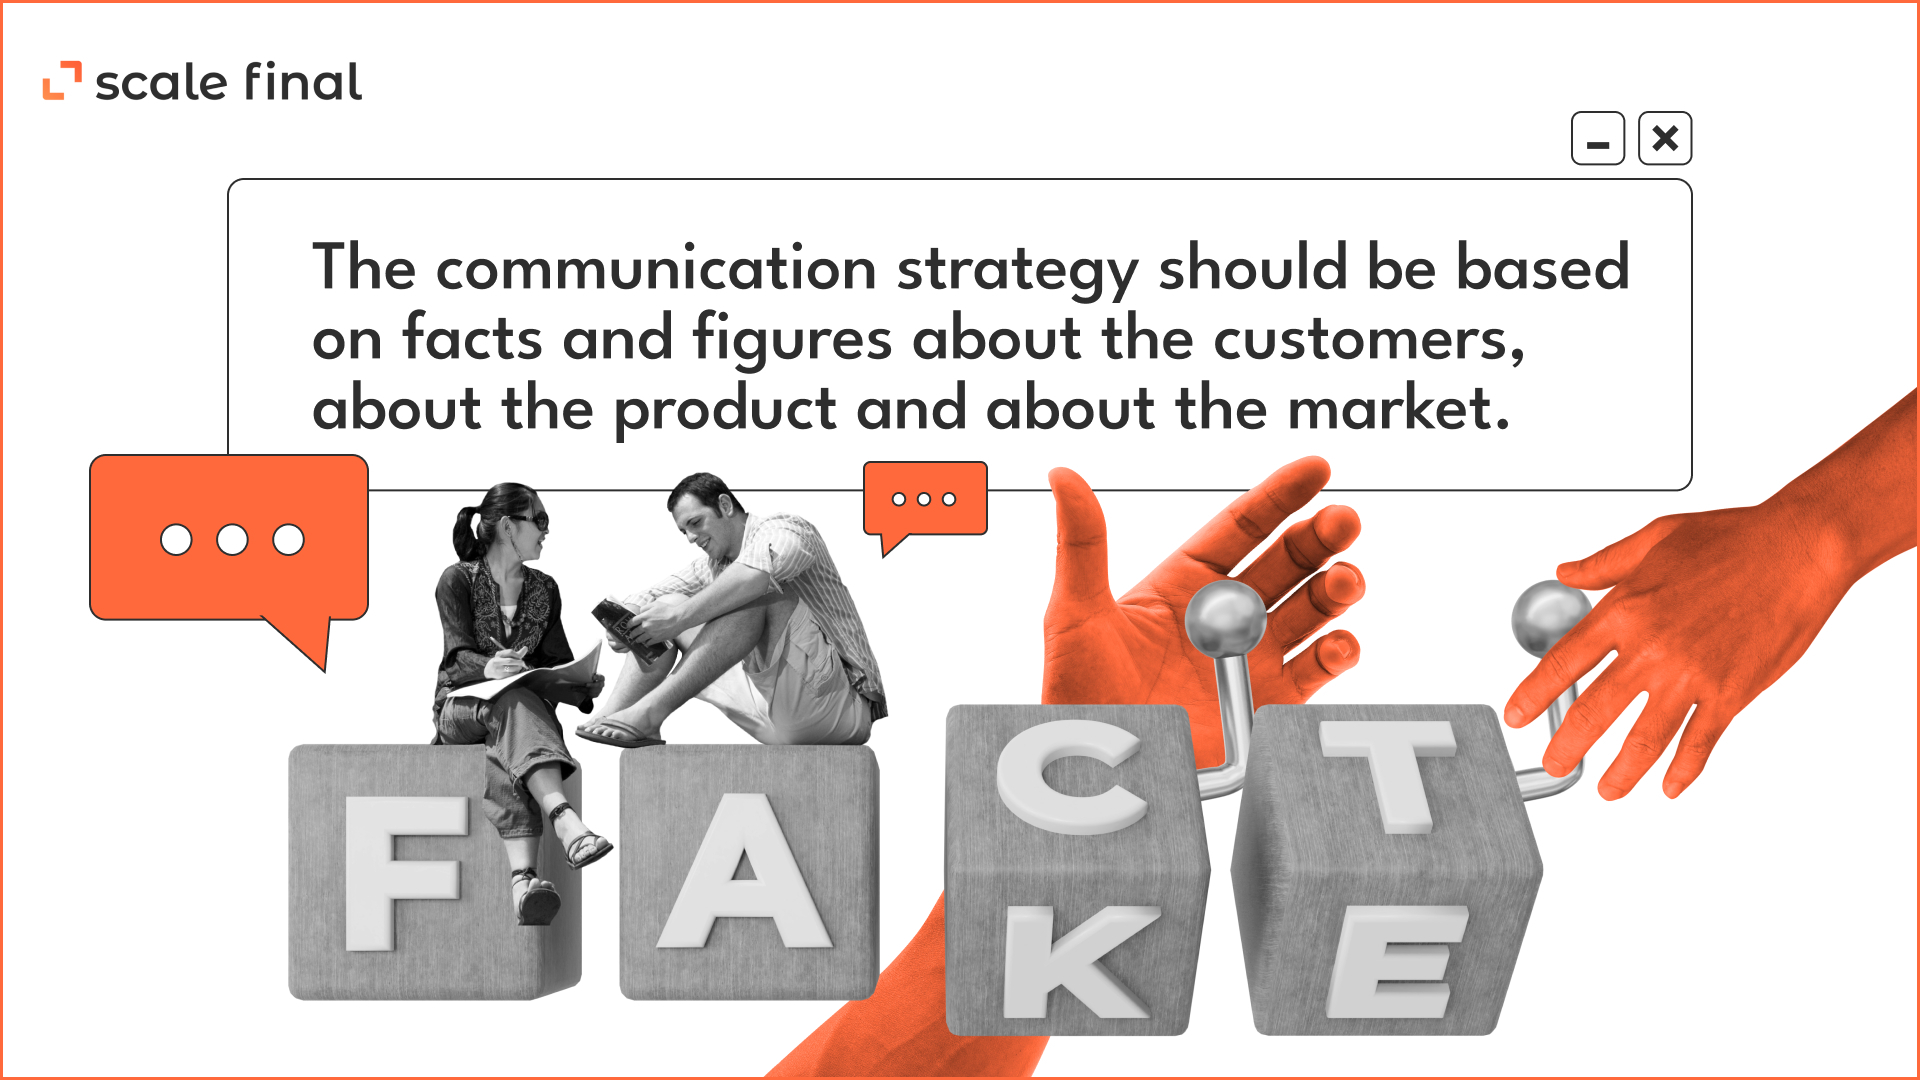 The communication strategy should be based on facts and figures about the customers, about the product and about the market.